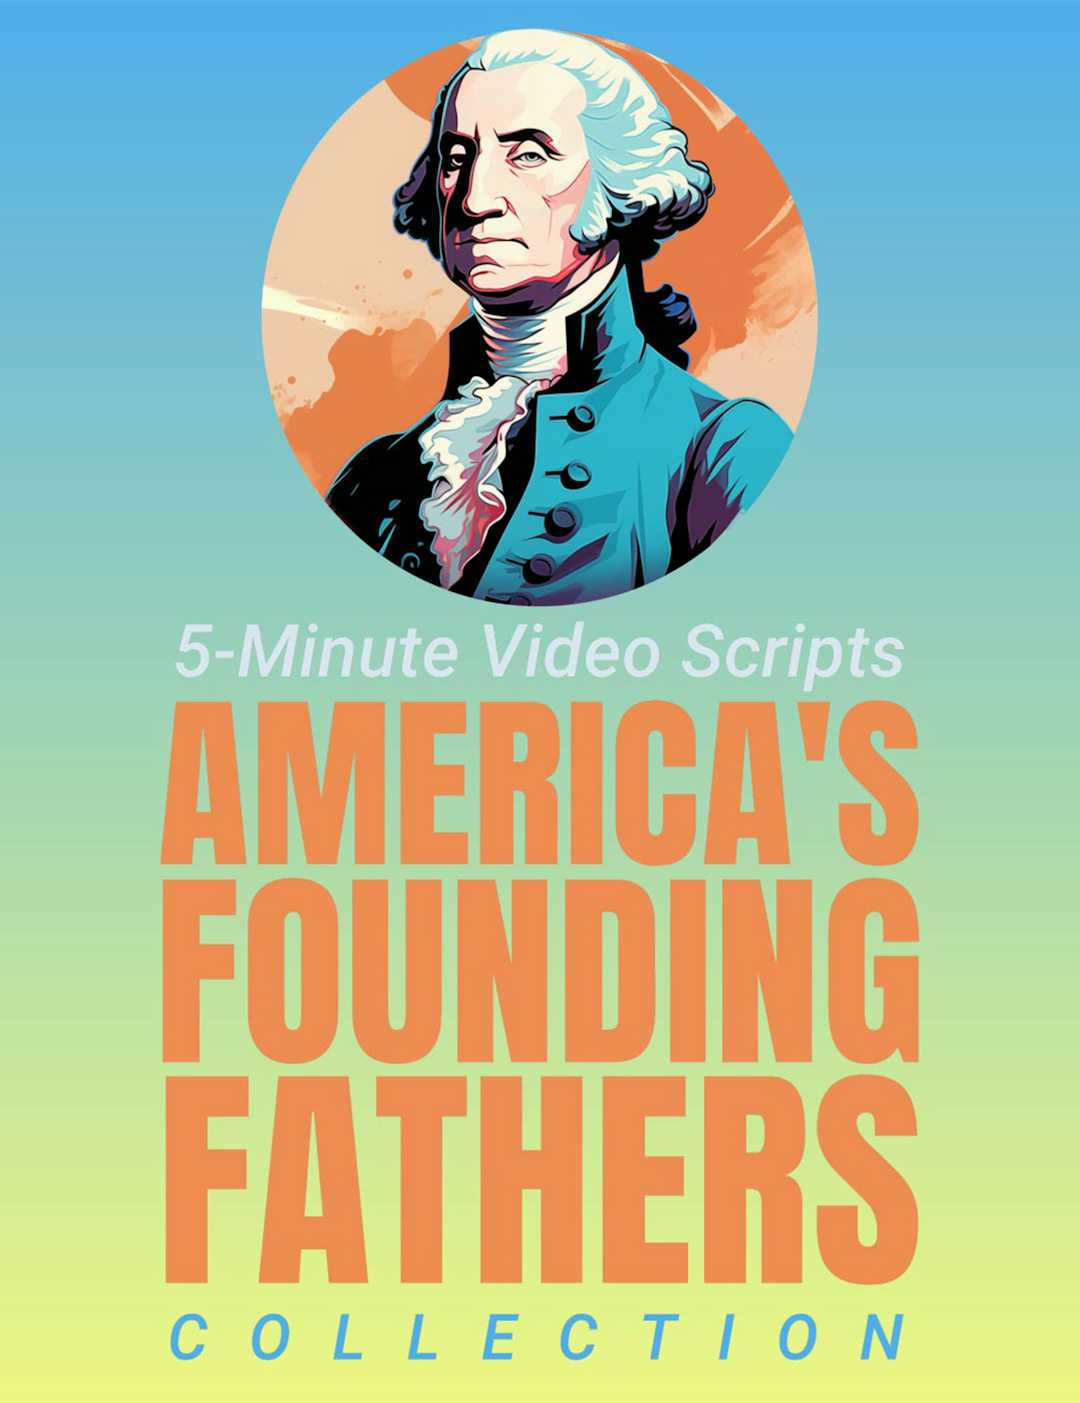 The Founding Fathers e-book